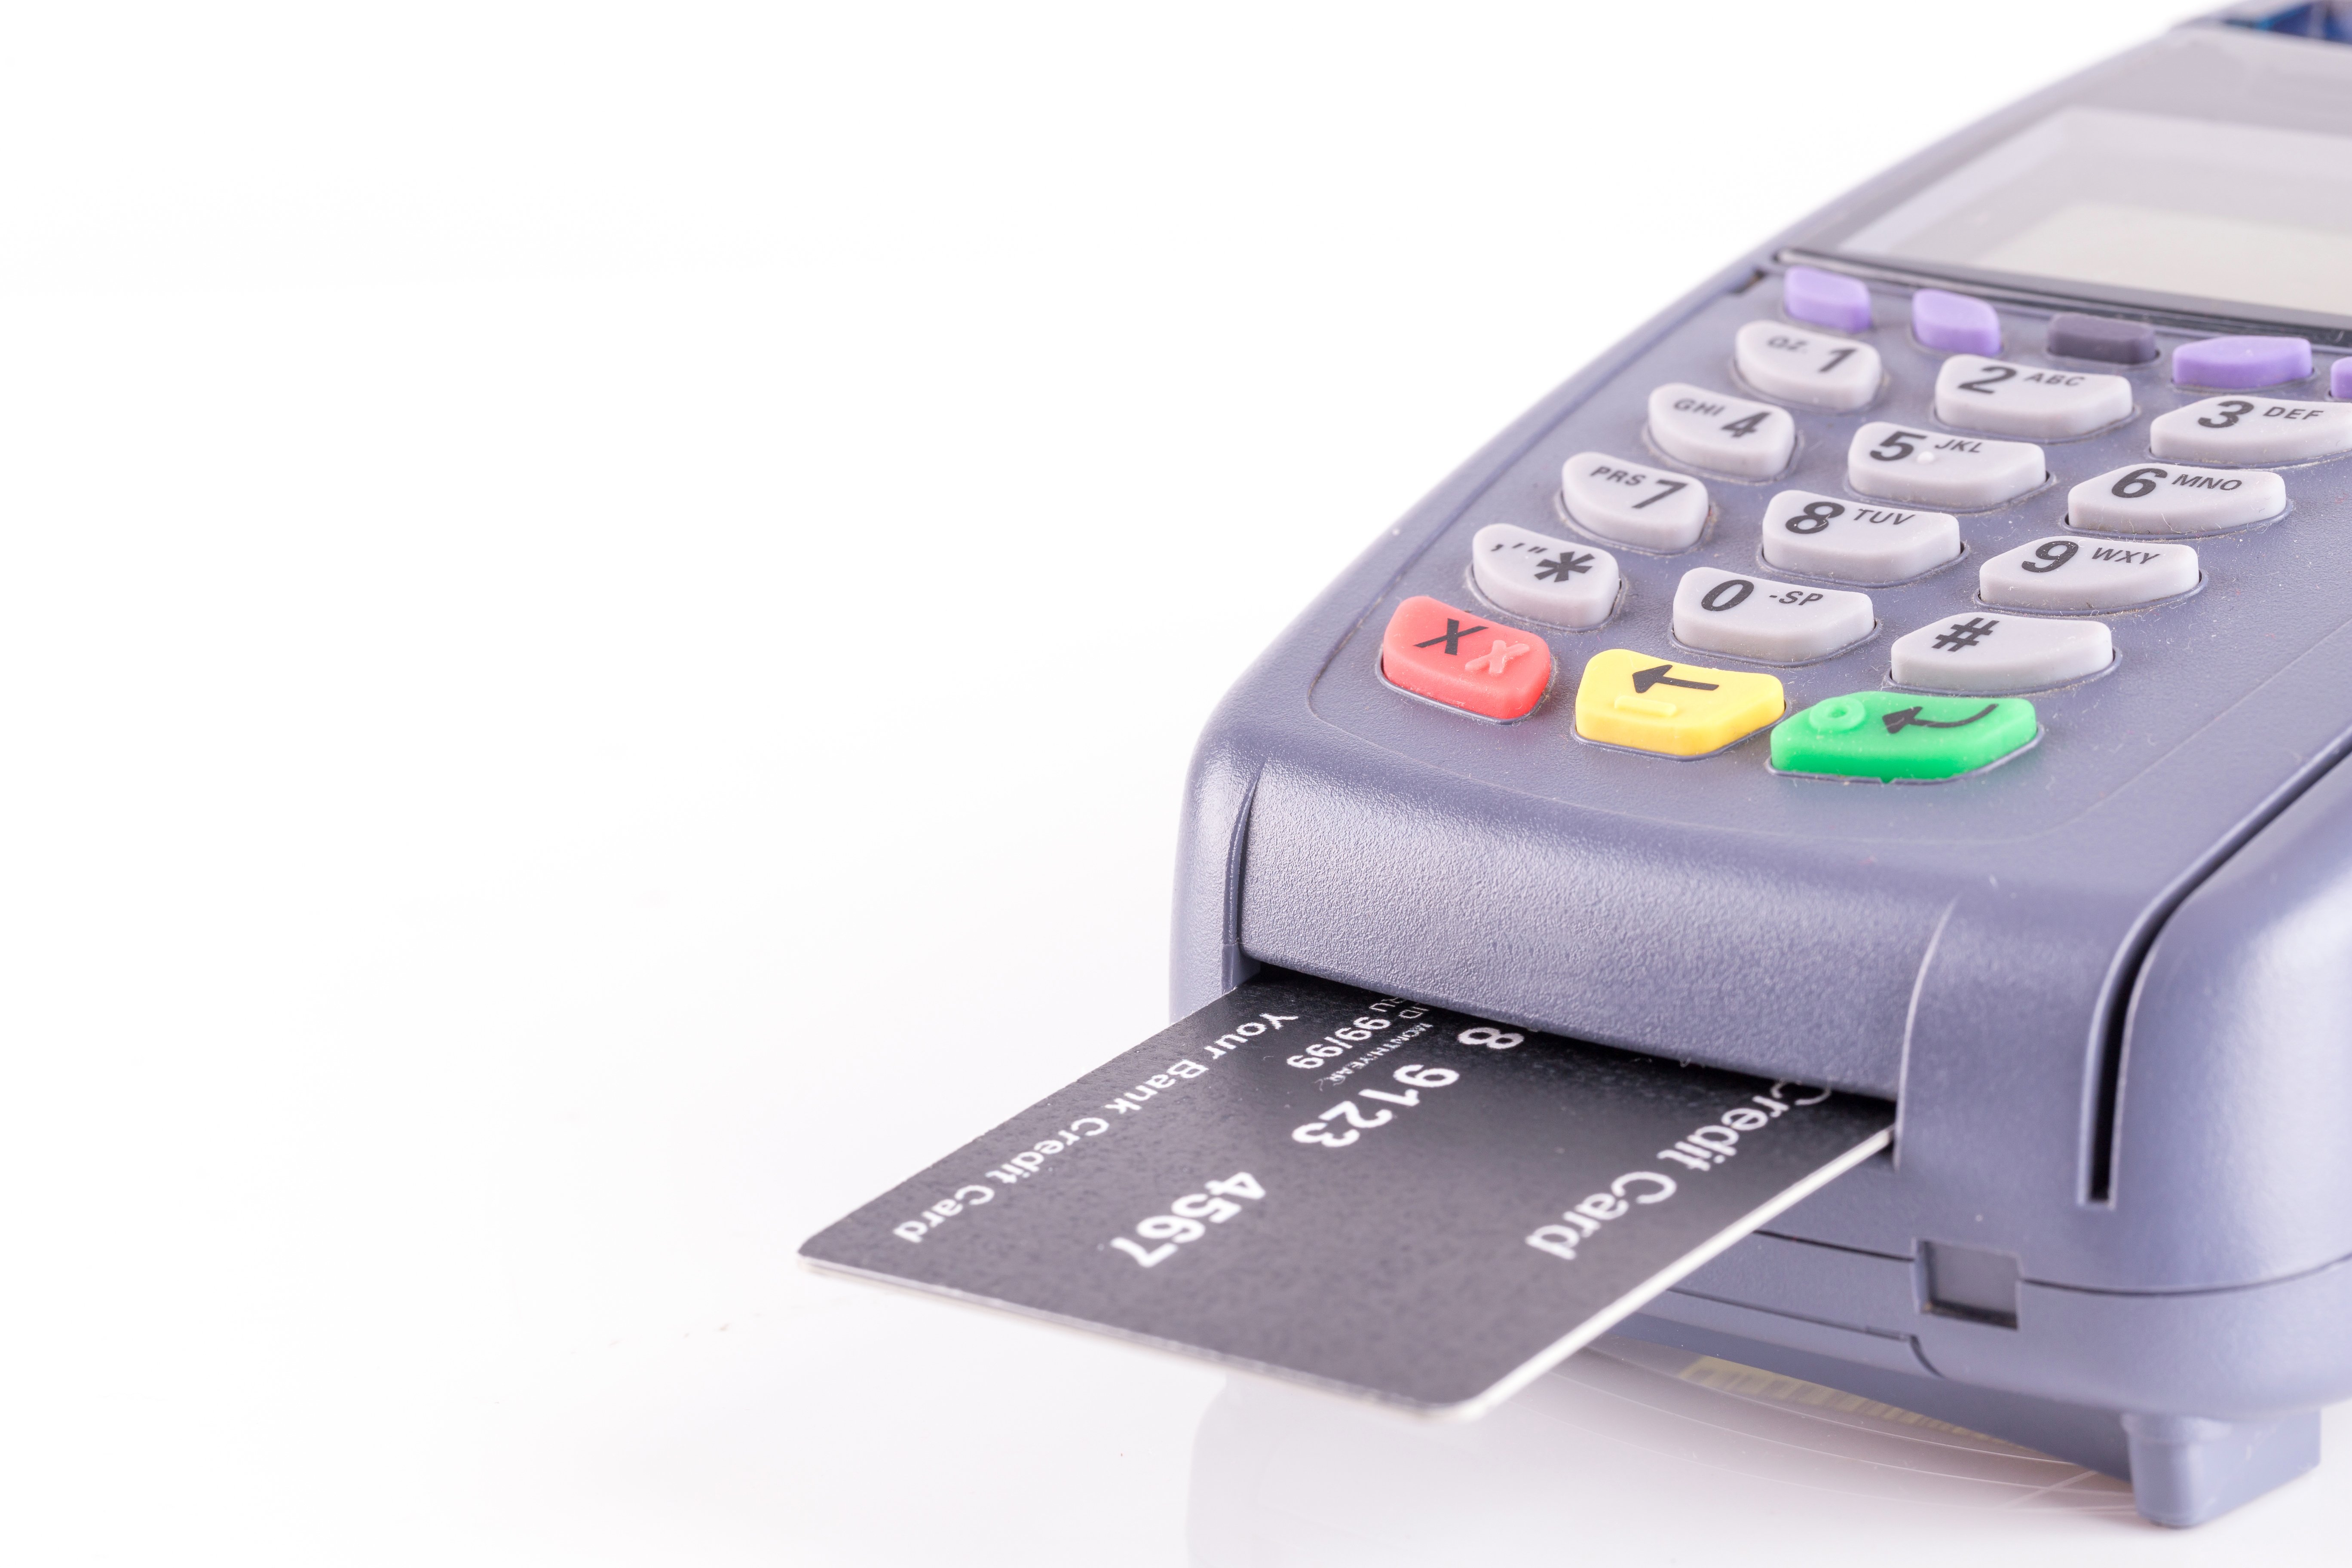 Starting a Credit Card Machine Business, by Shaw Merchant Group